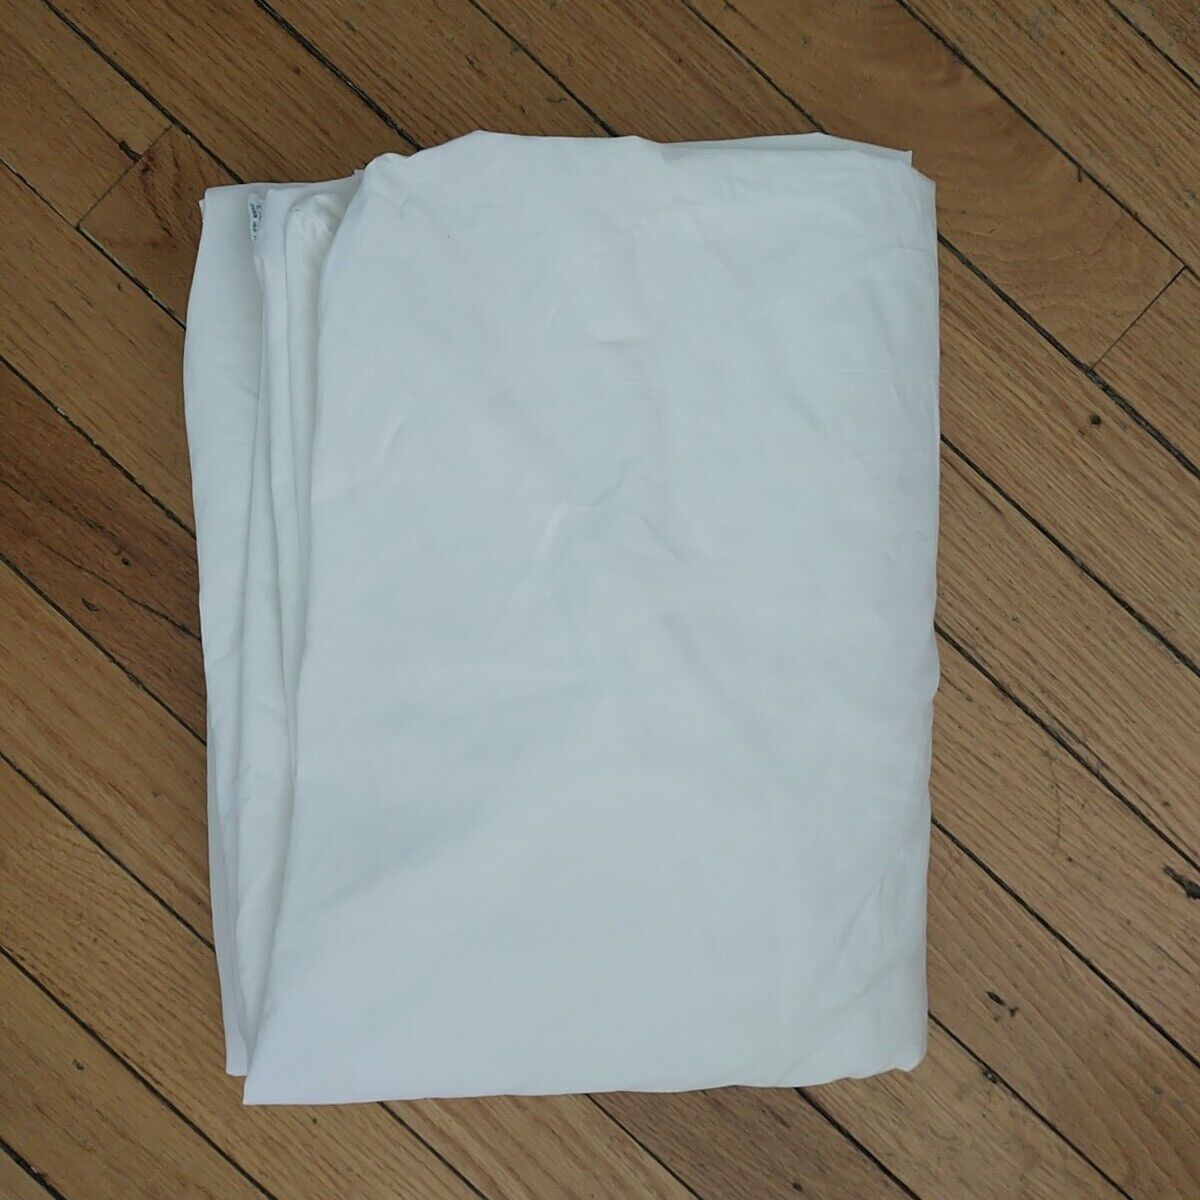 VTG Stevens Utica Mohawk Full Double Size Fitted Sheet Combed Percale White 